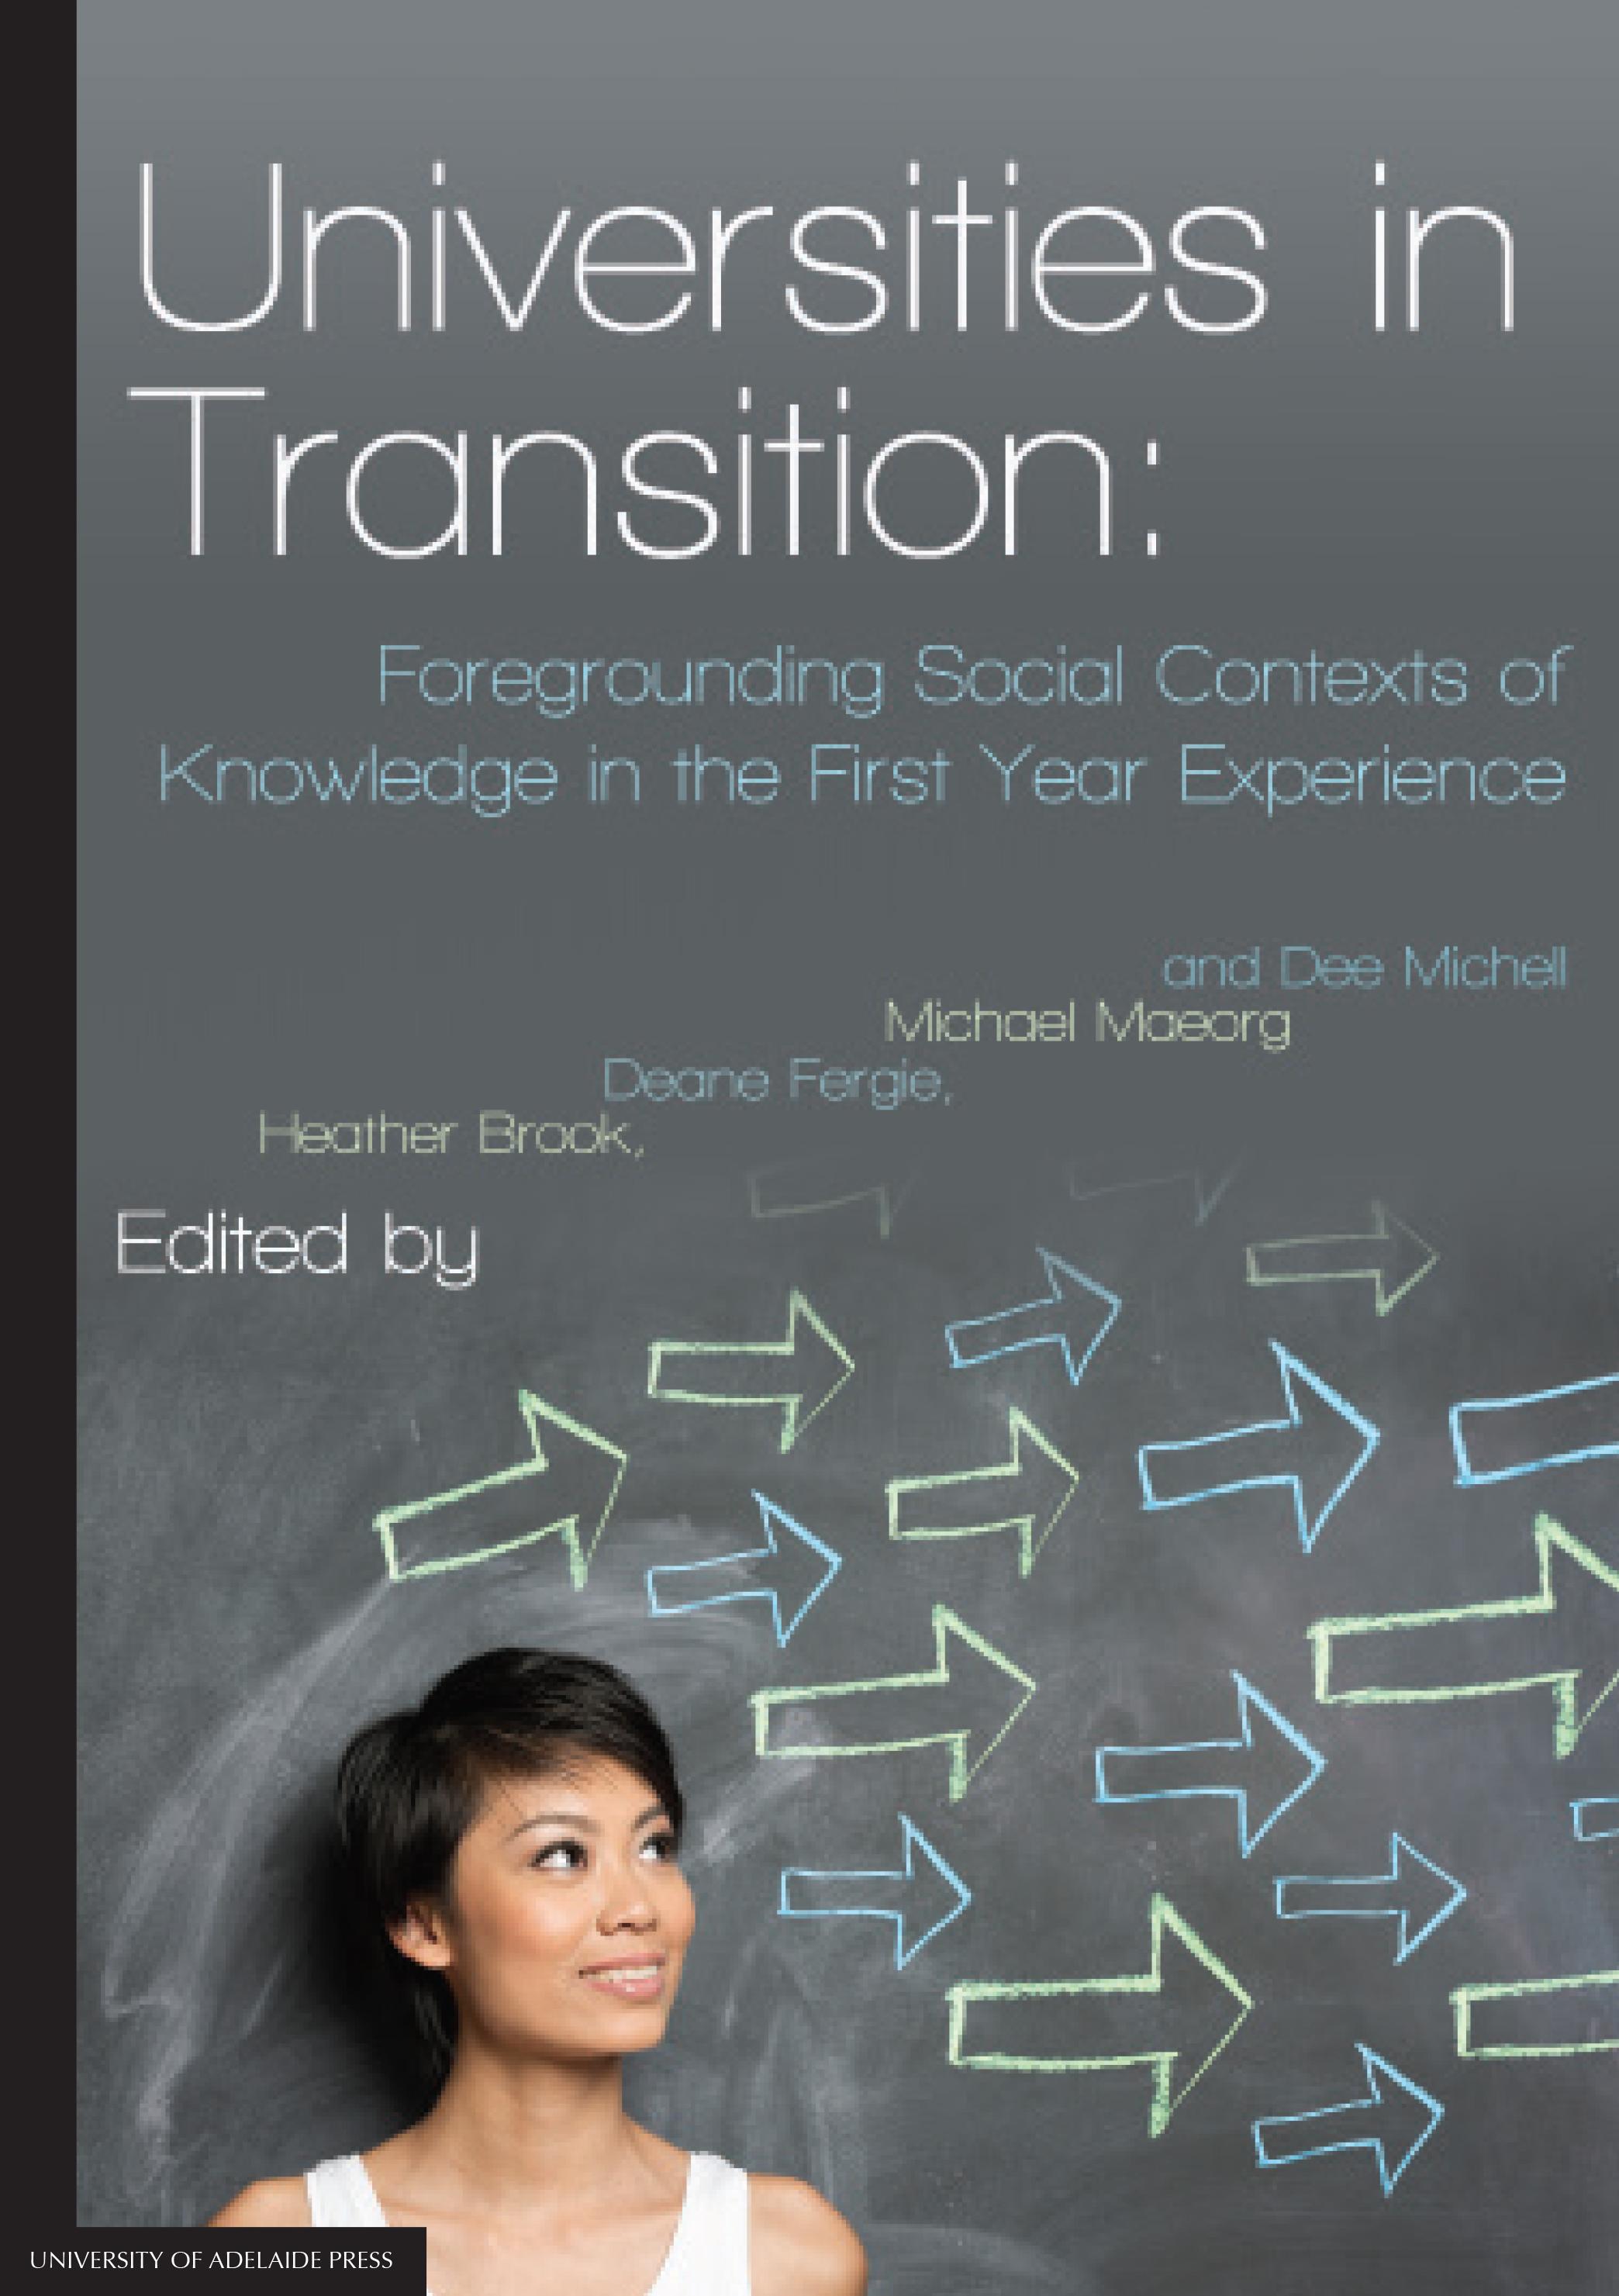 Universities in transition cover